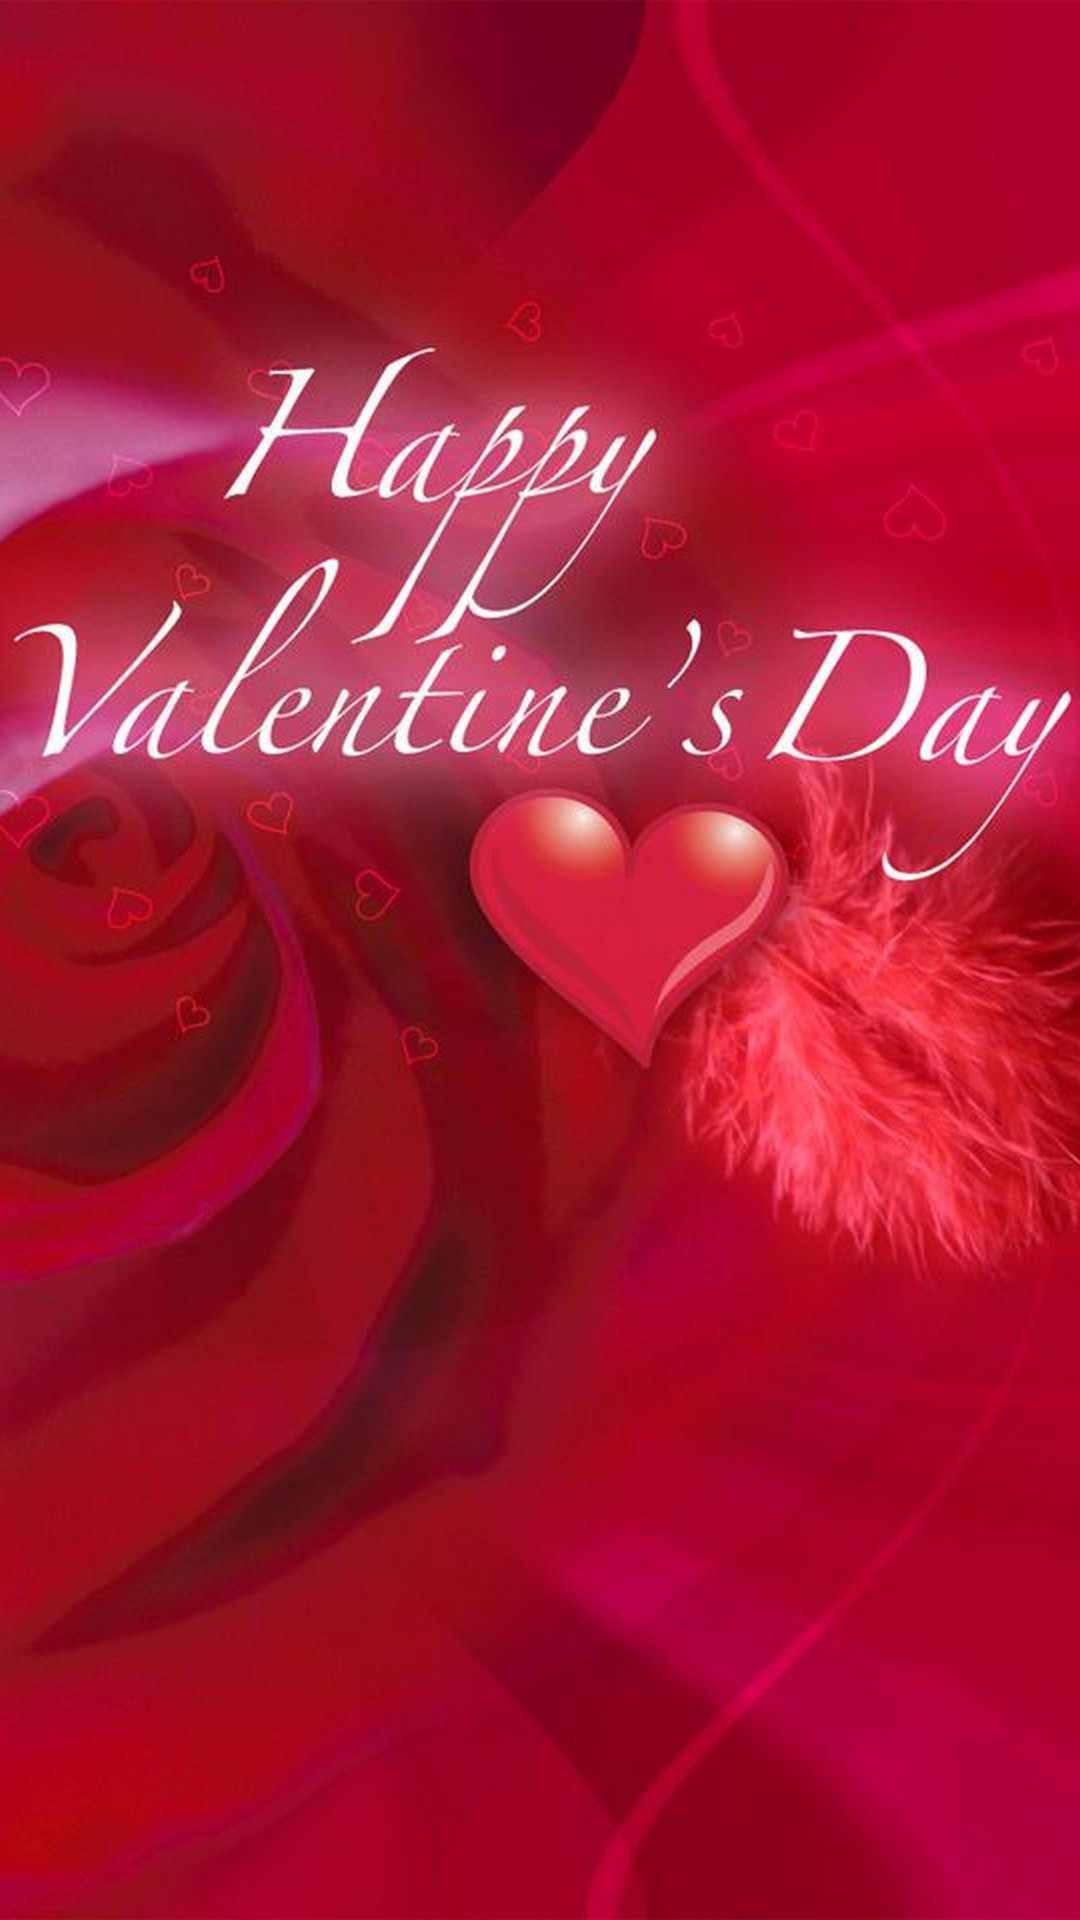 35 Happy Valentine S Day 2020 Wallpapers On Wallpapersafari